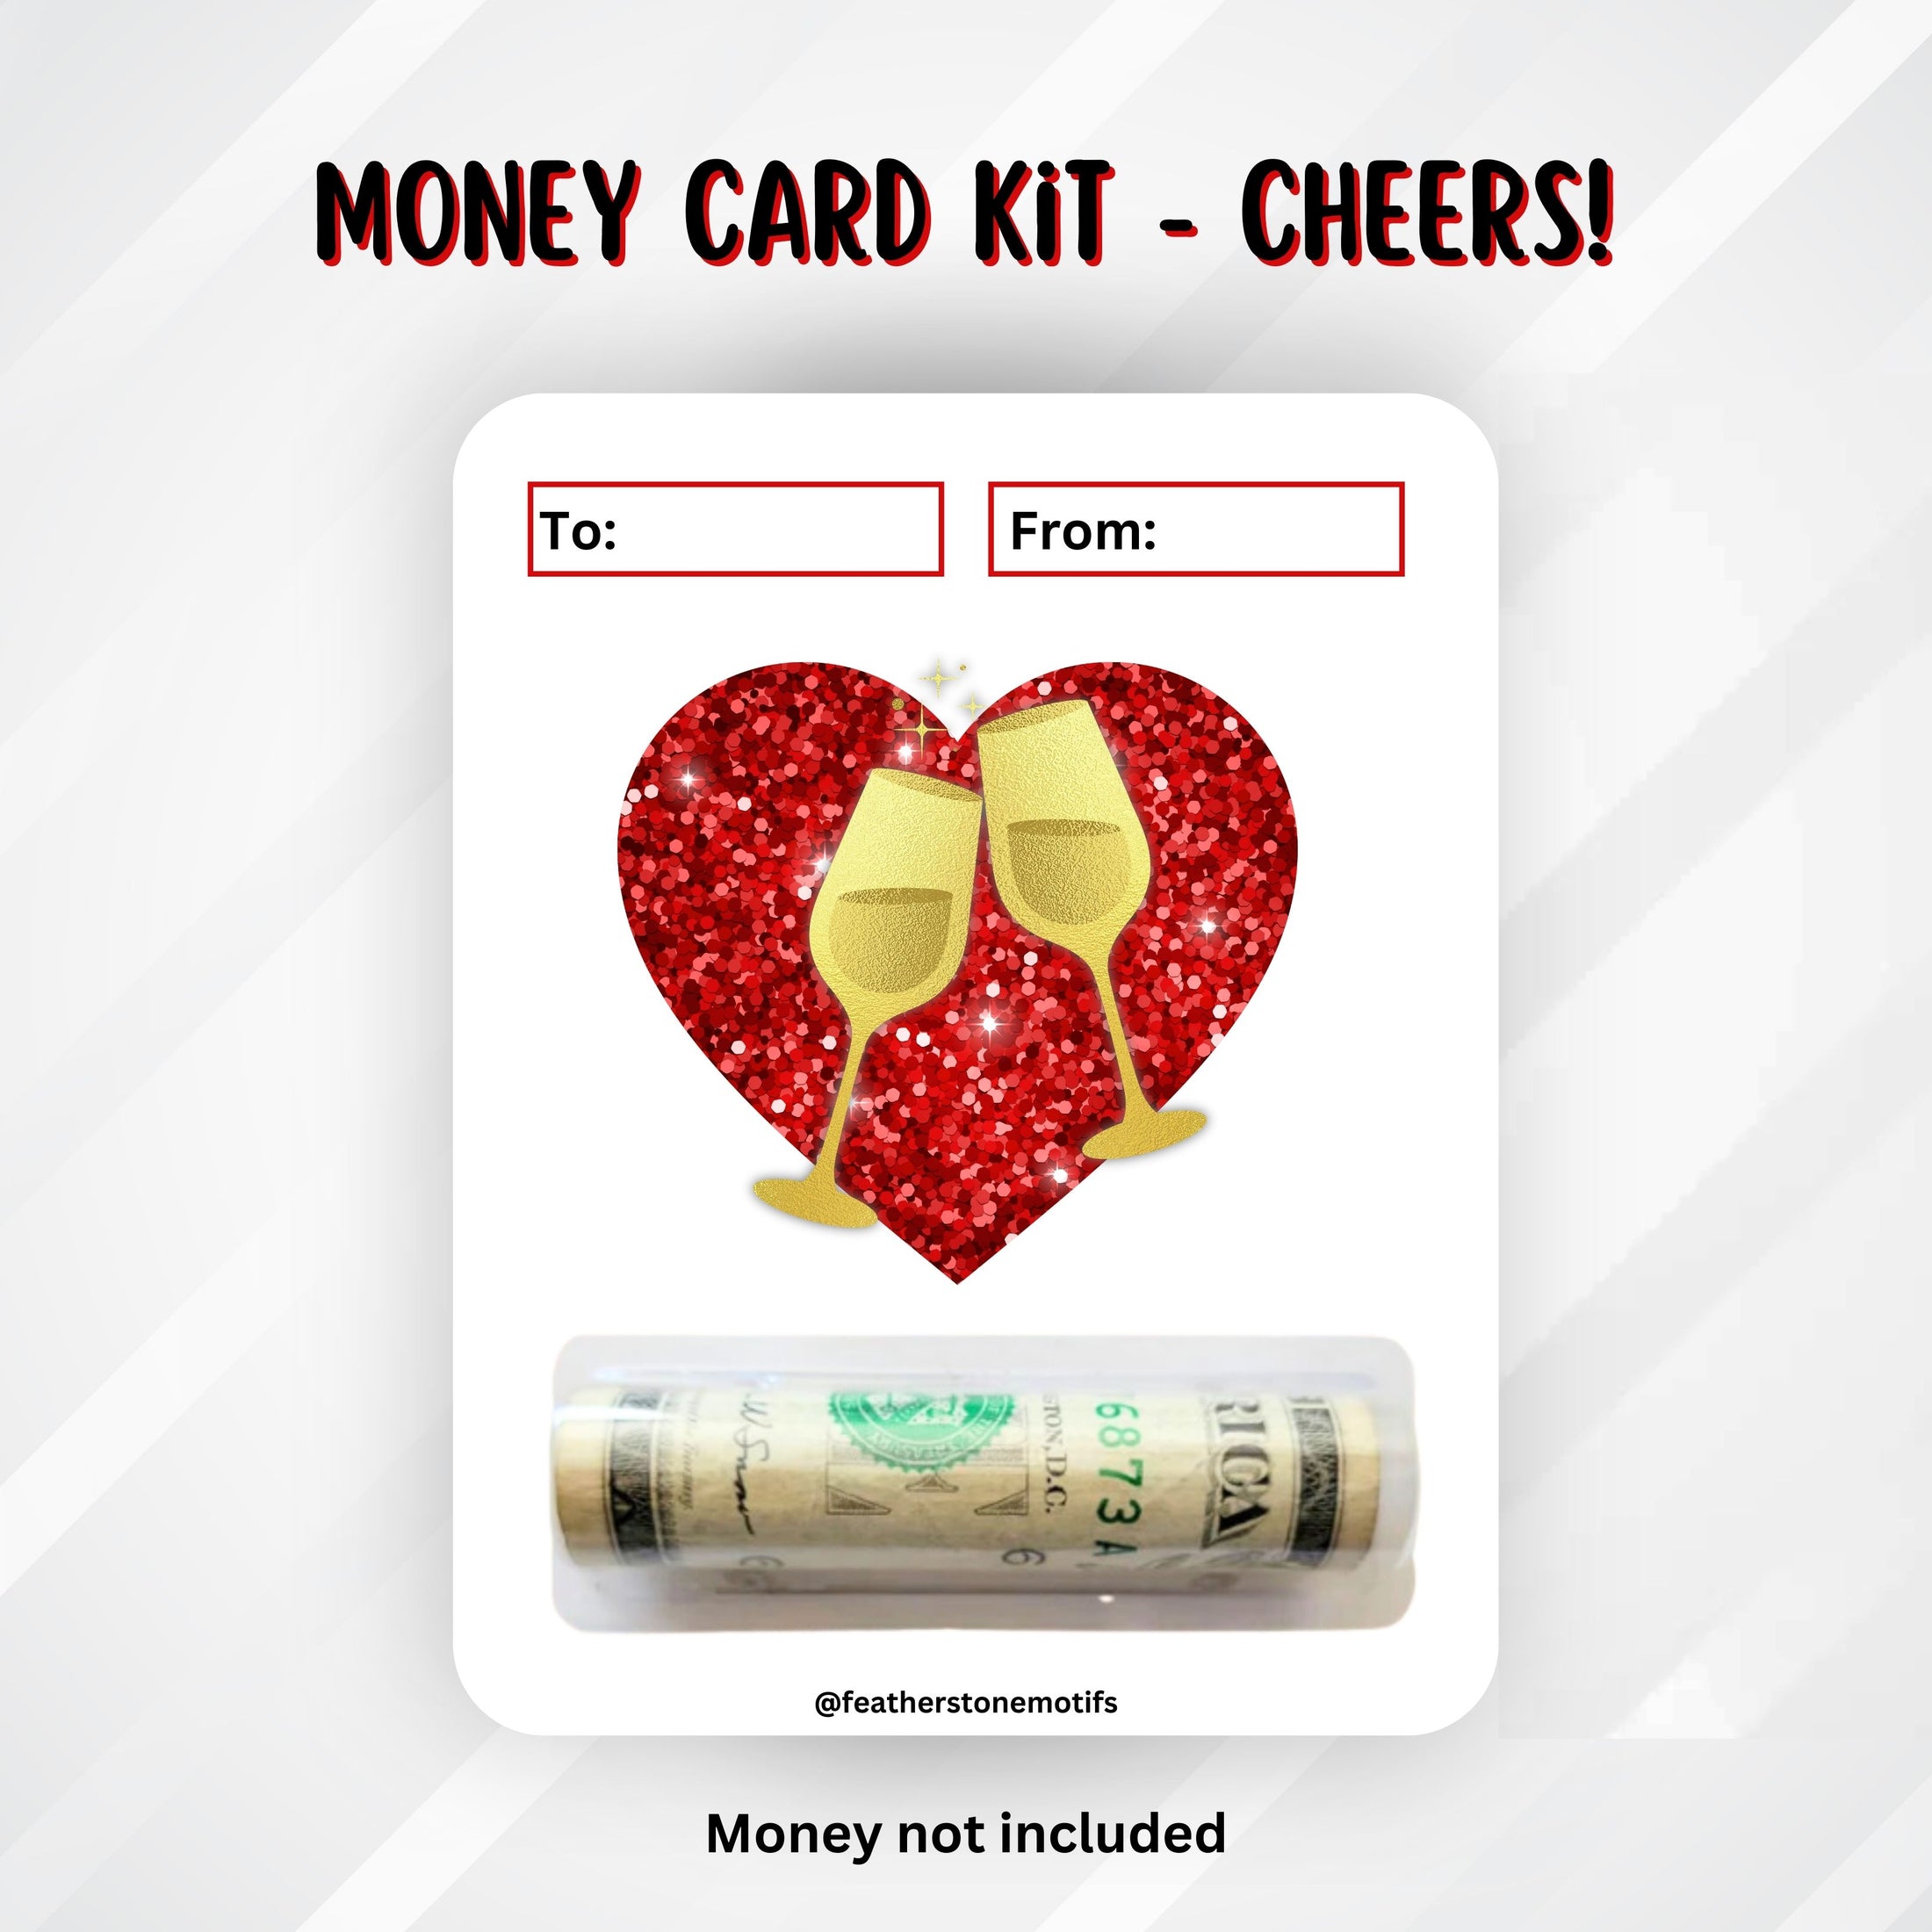 This image shows the money tube attached to the Cheers Money Card.